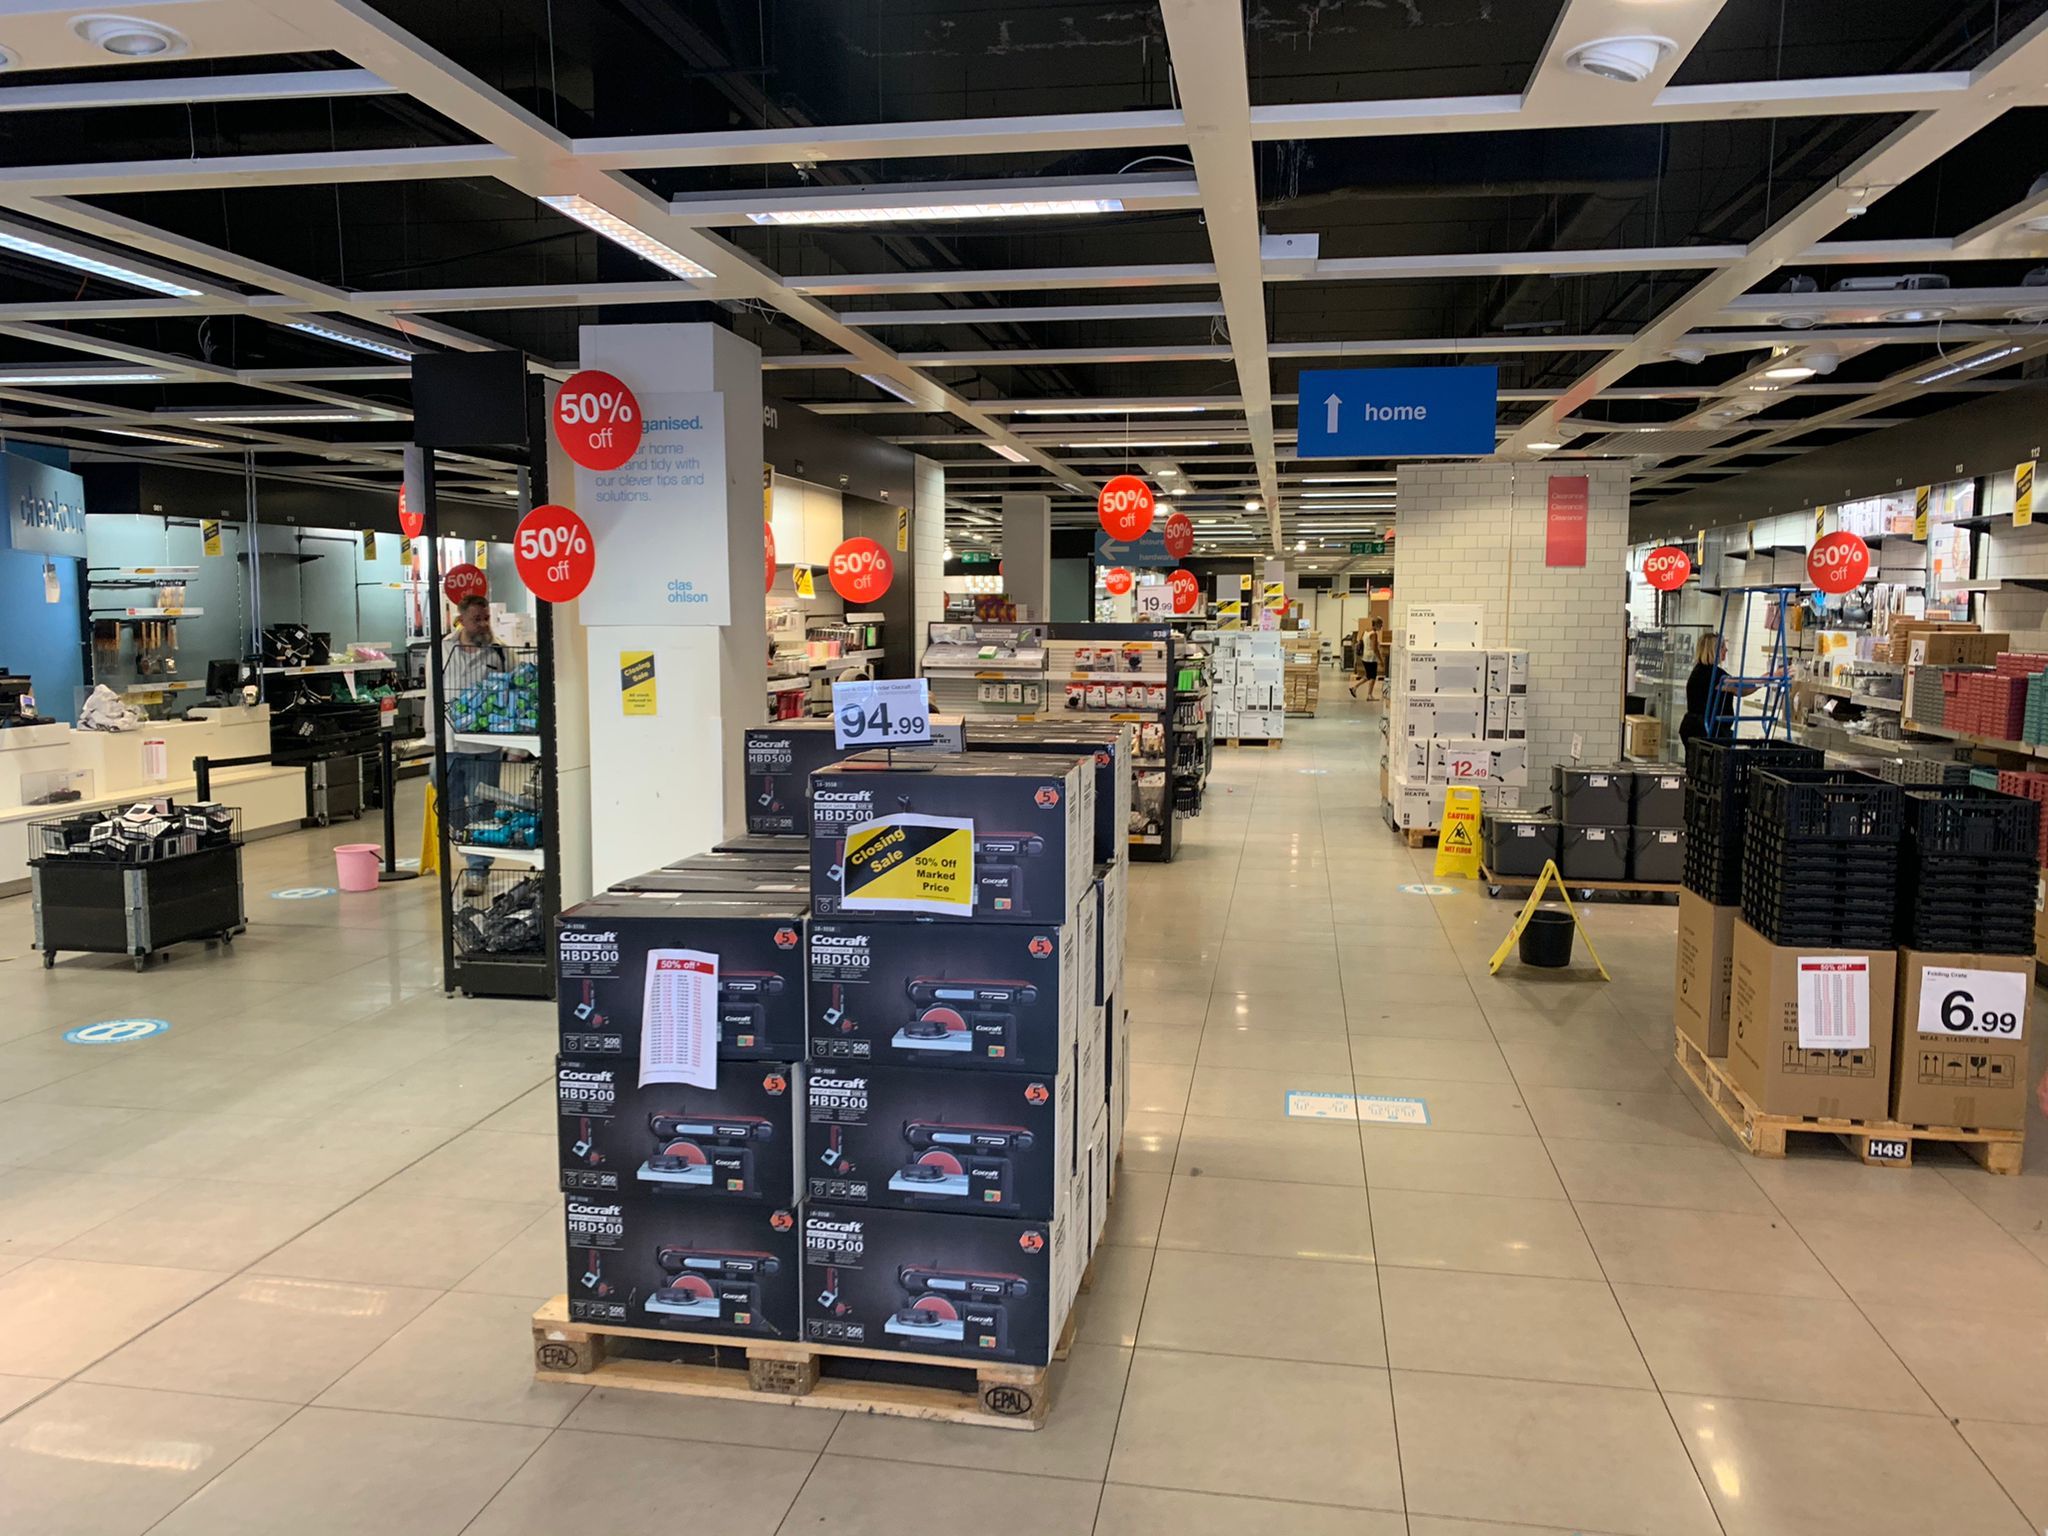 Clas Ohlson is set to close in August, but it is not known when